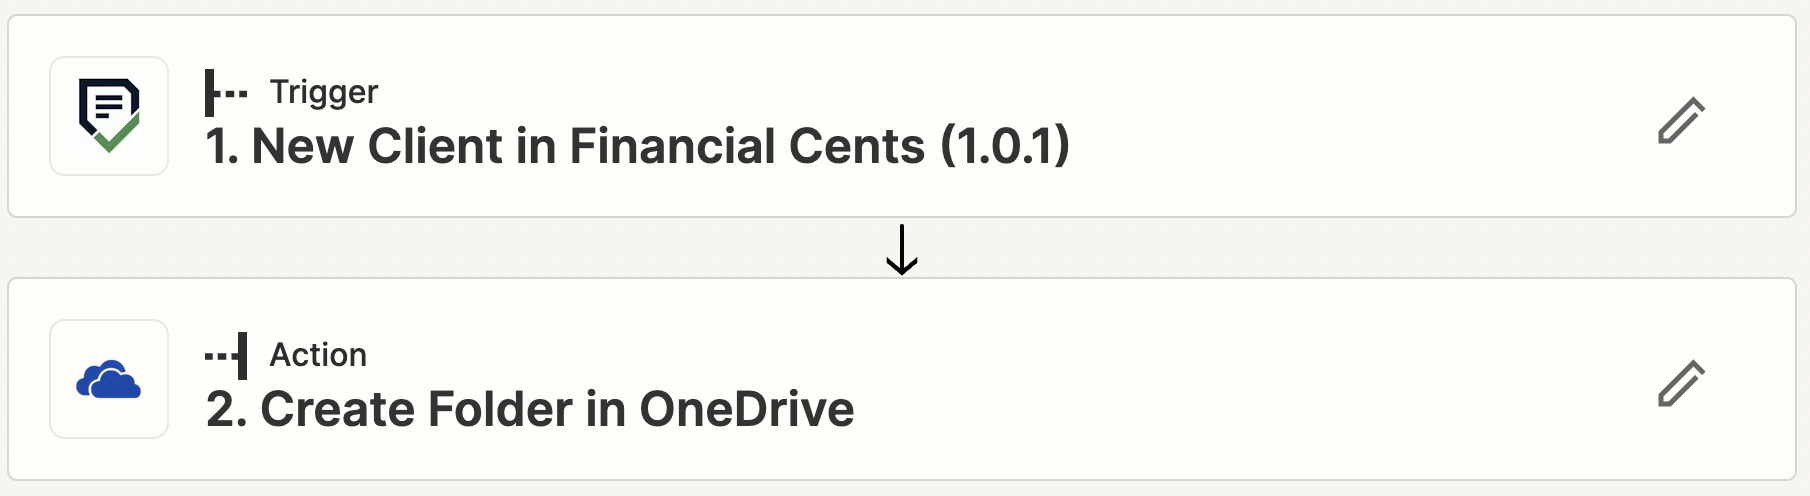 onedrive and financial cents integration step 1